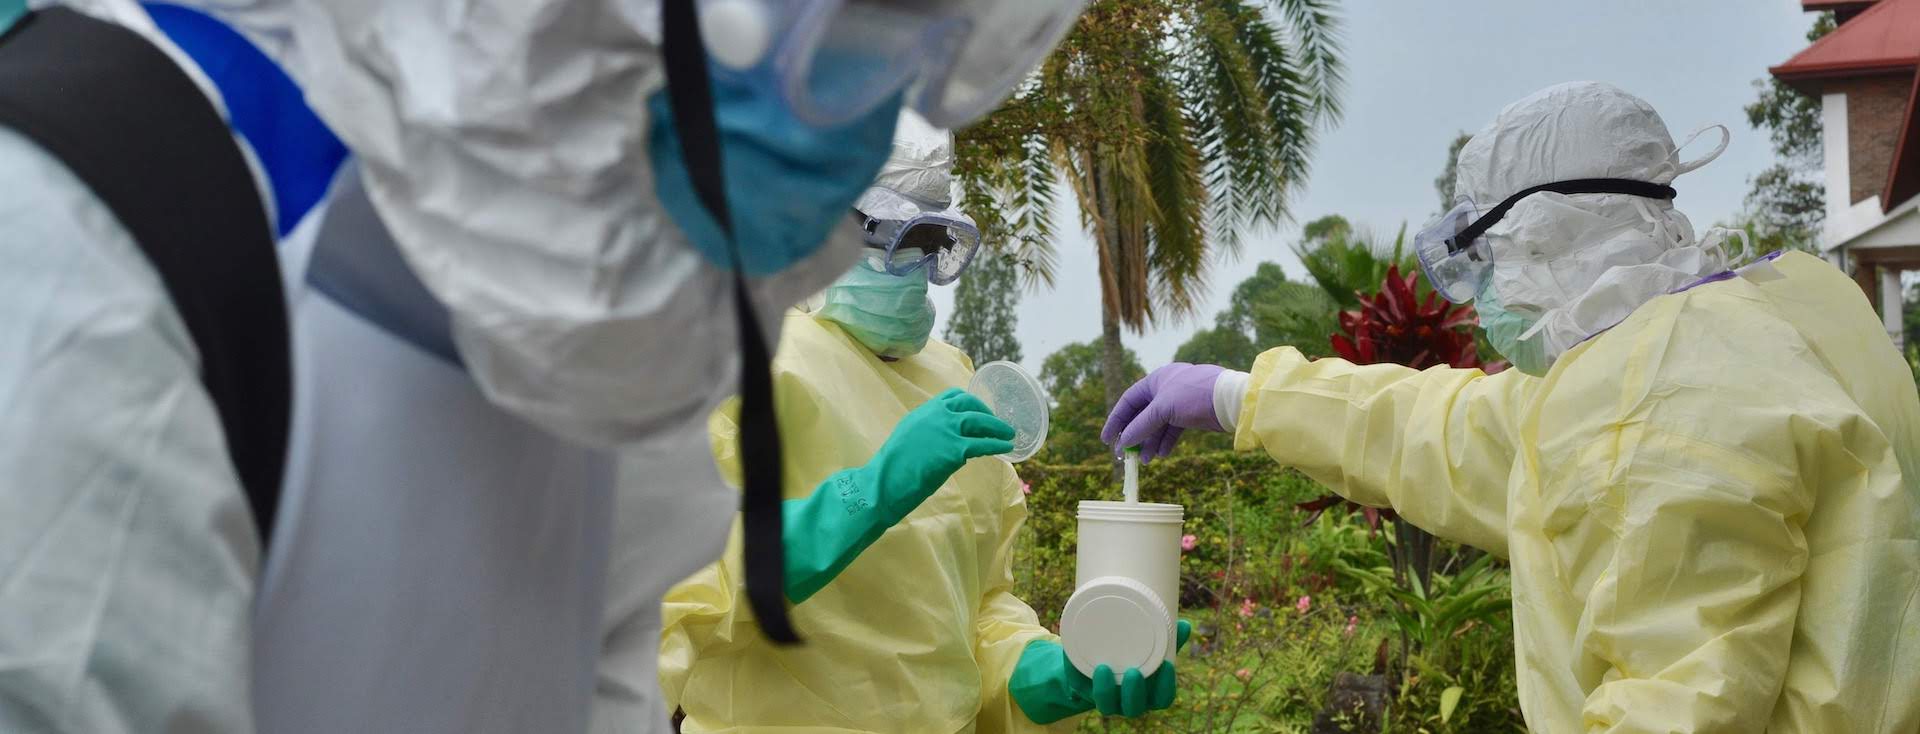  No link between two ongoing Ebola outbreaks in the Democratic Republic of the Congo